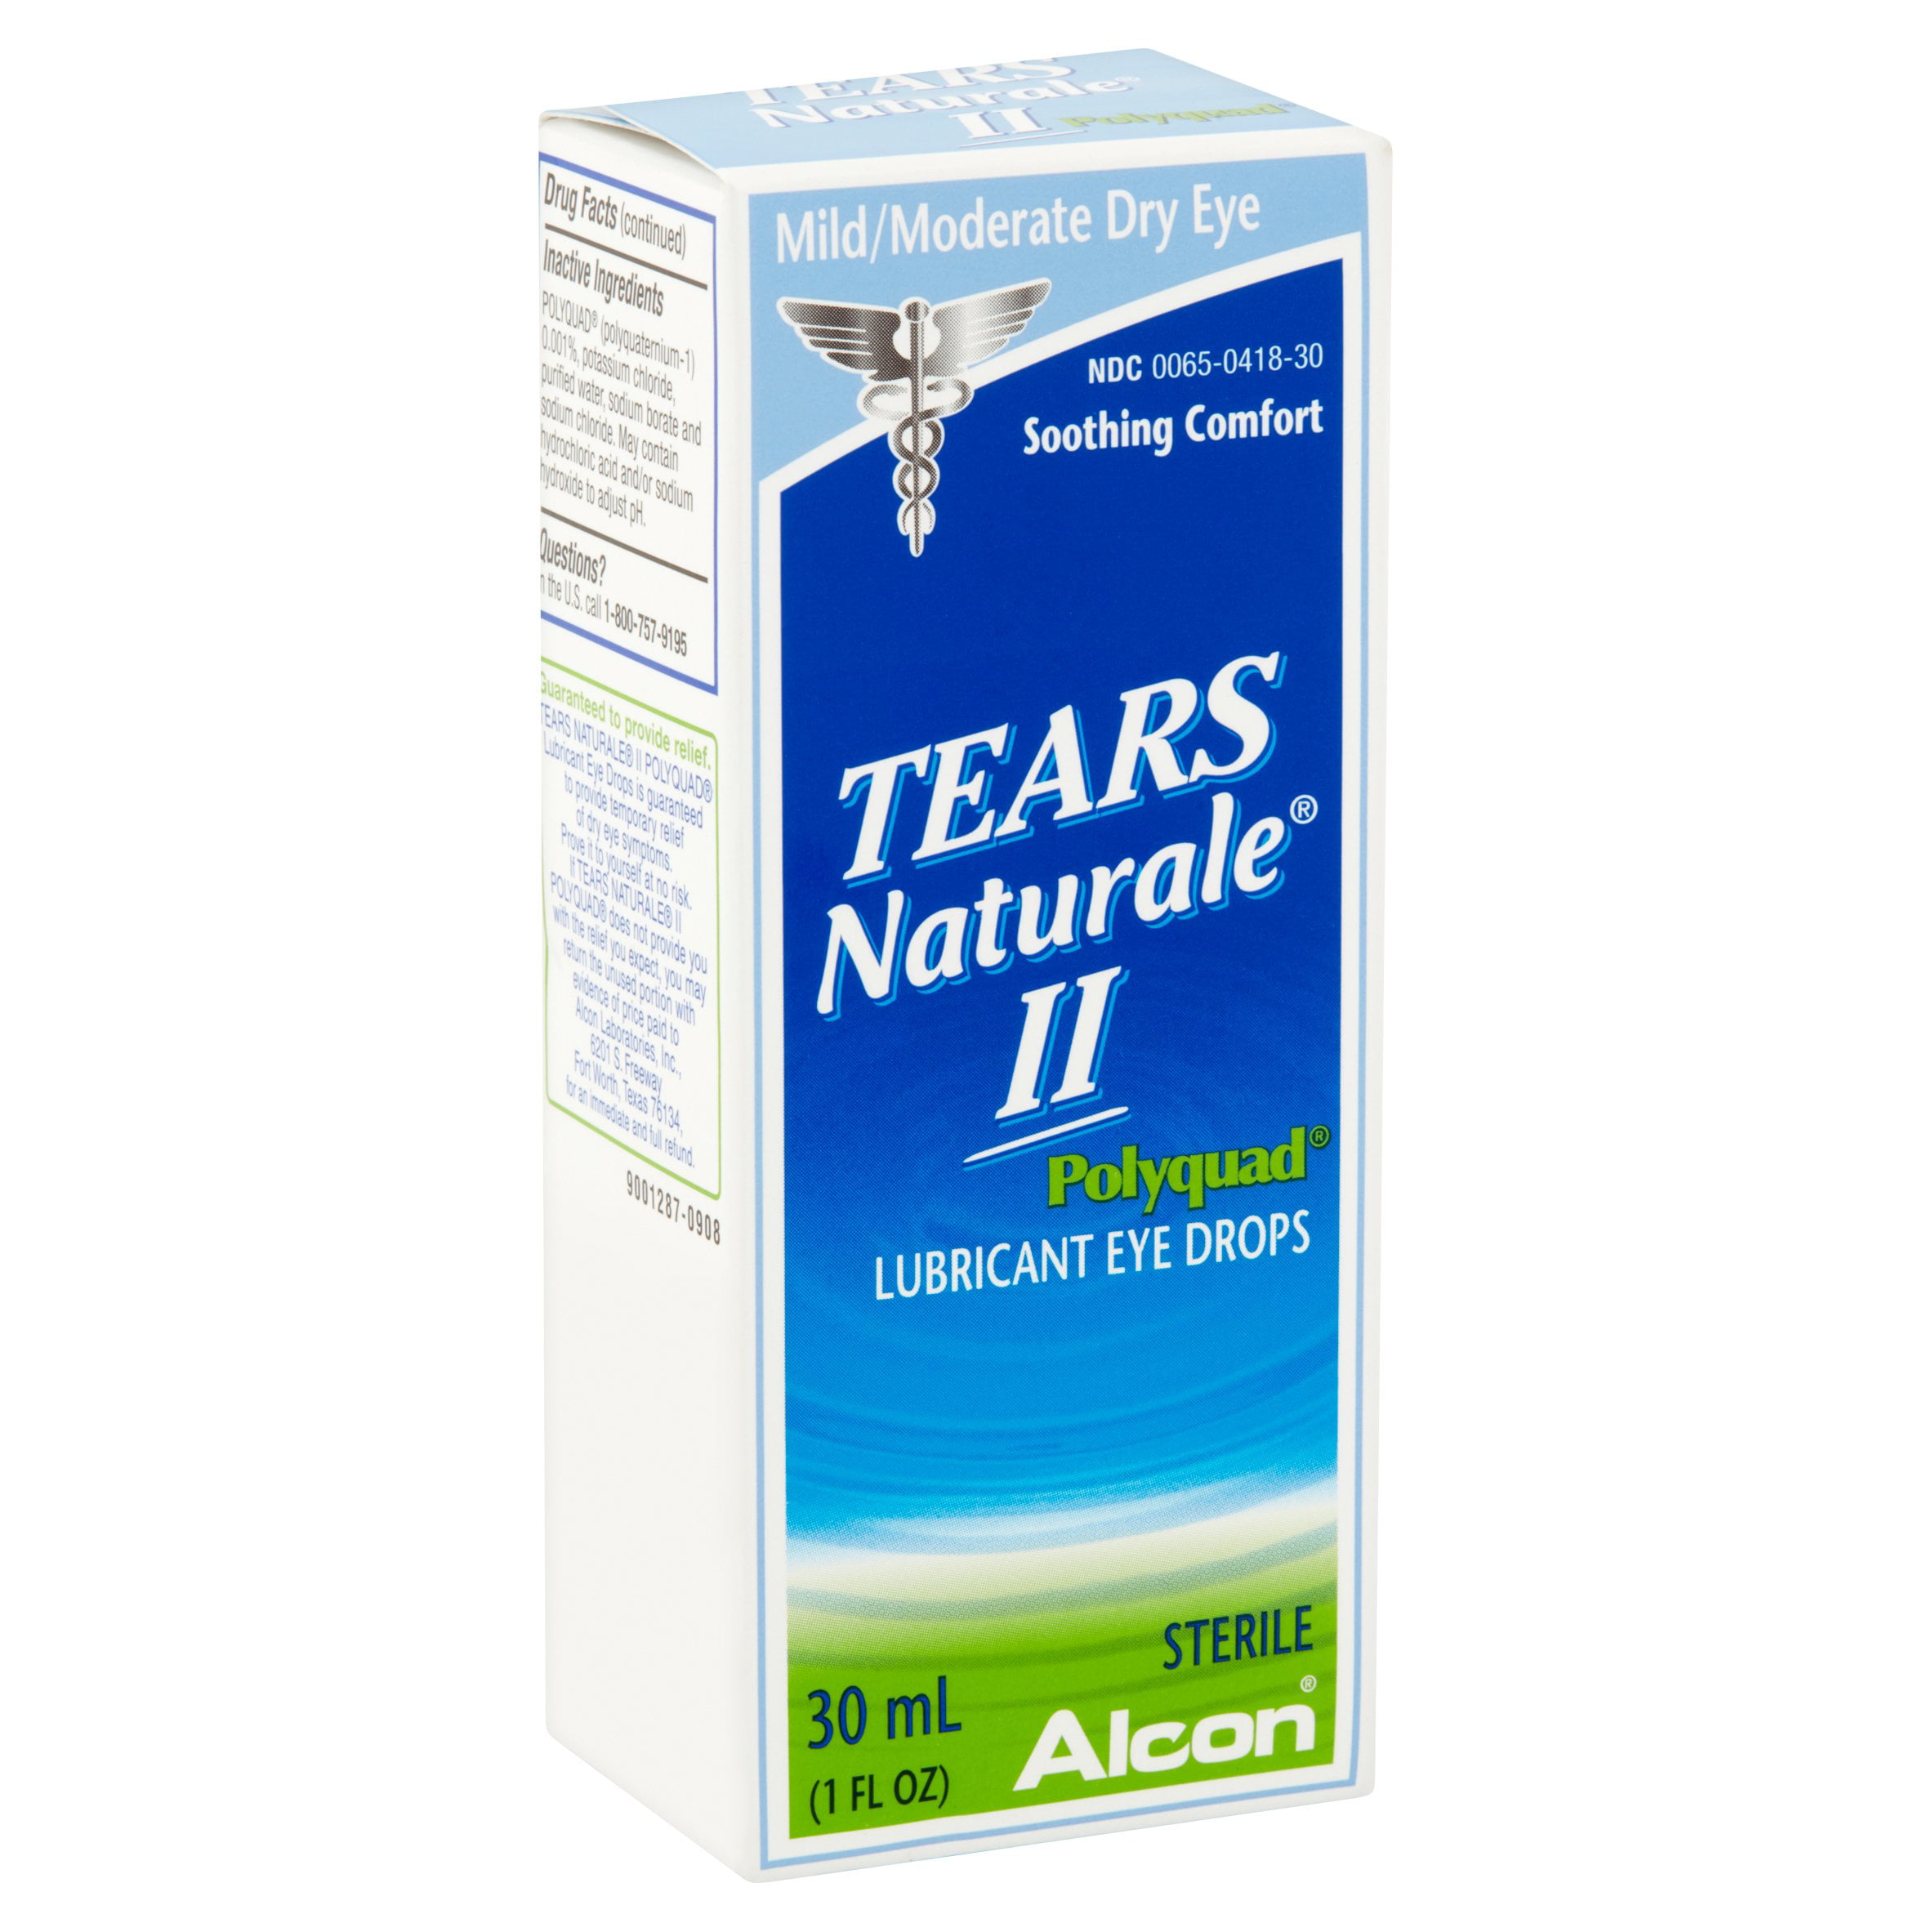 Alcon tears naturale free from walmart medical billing kaiser permanente jobs